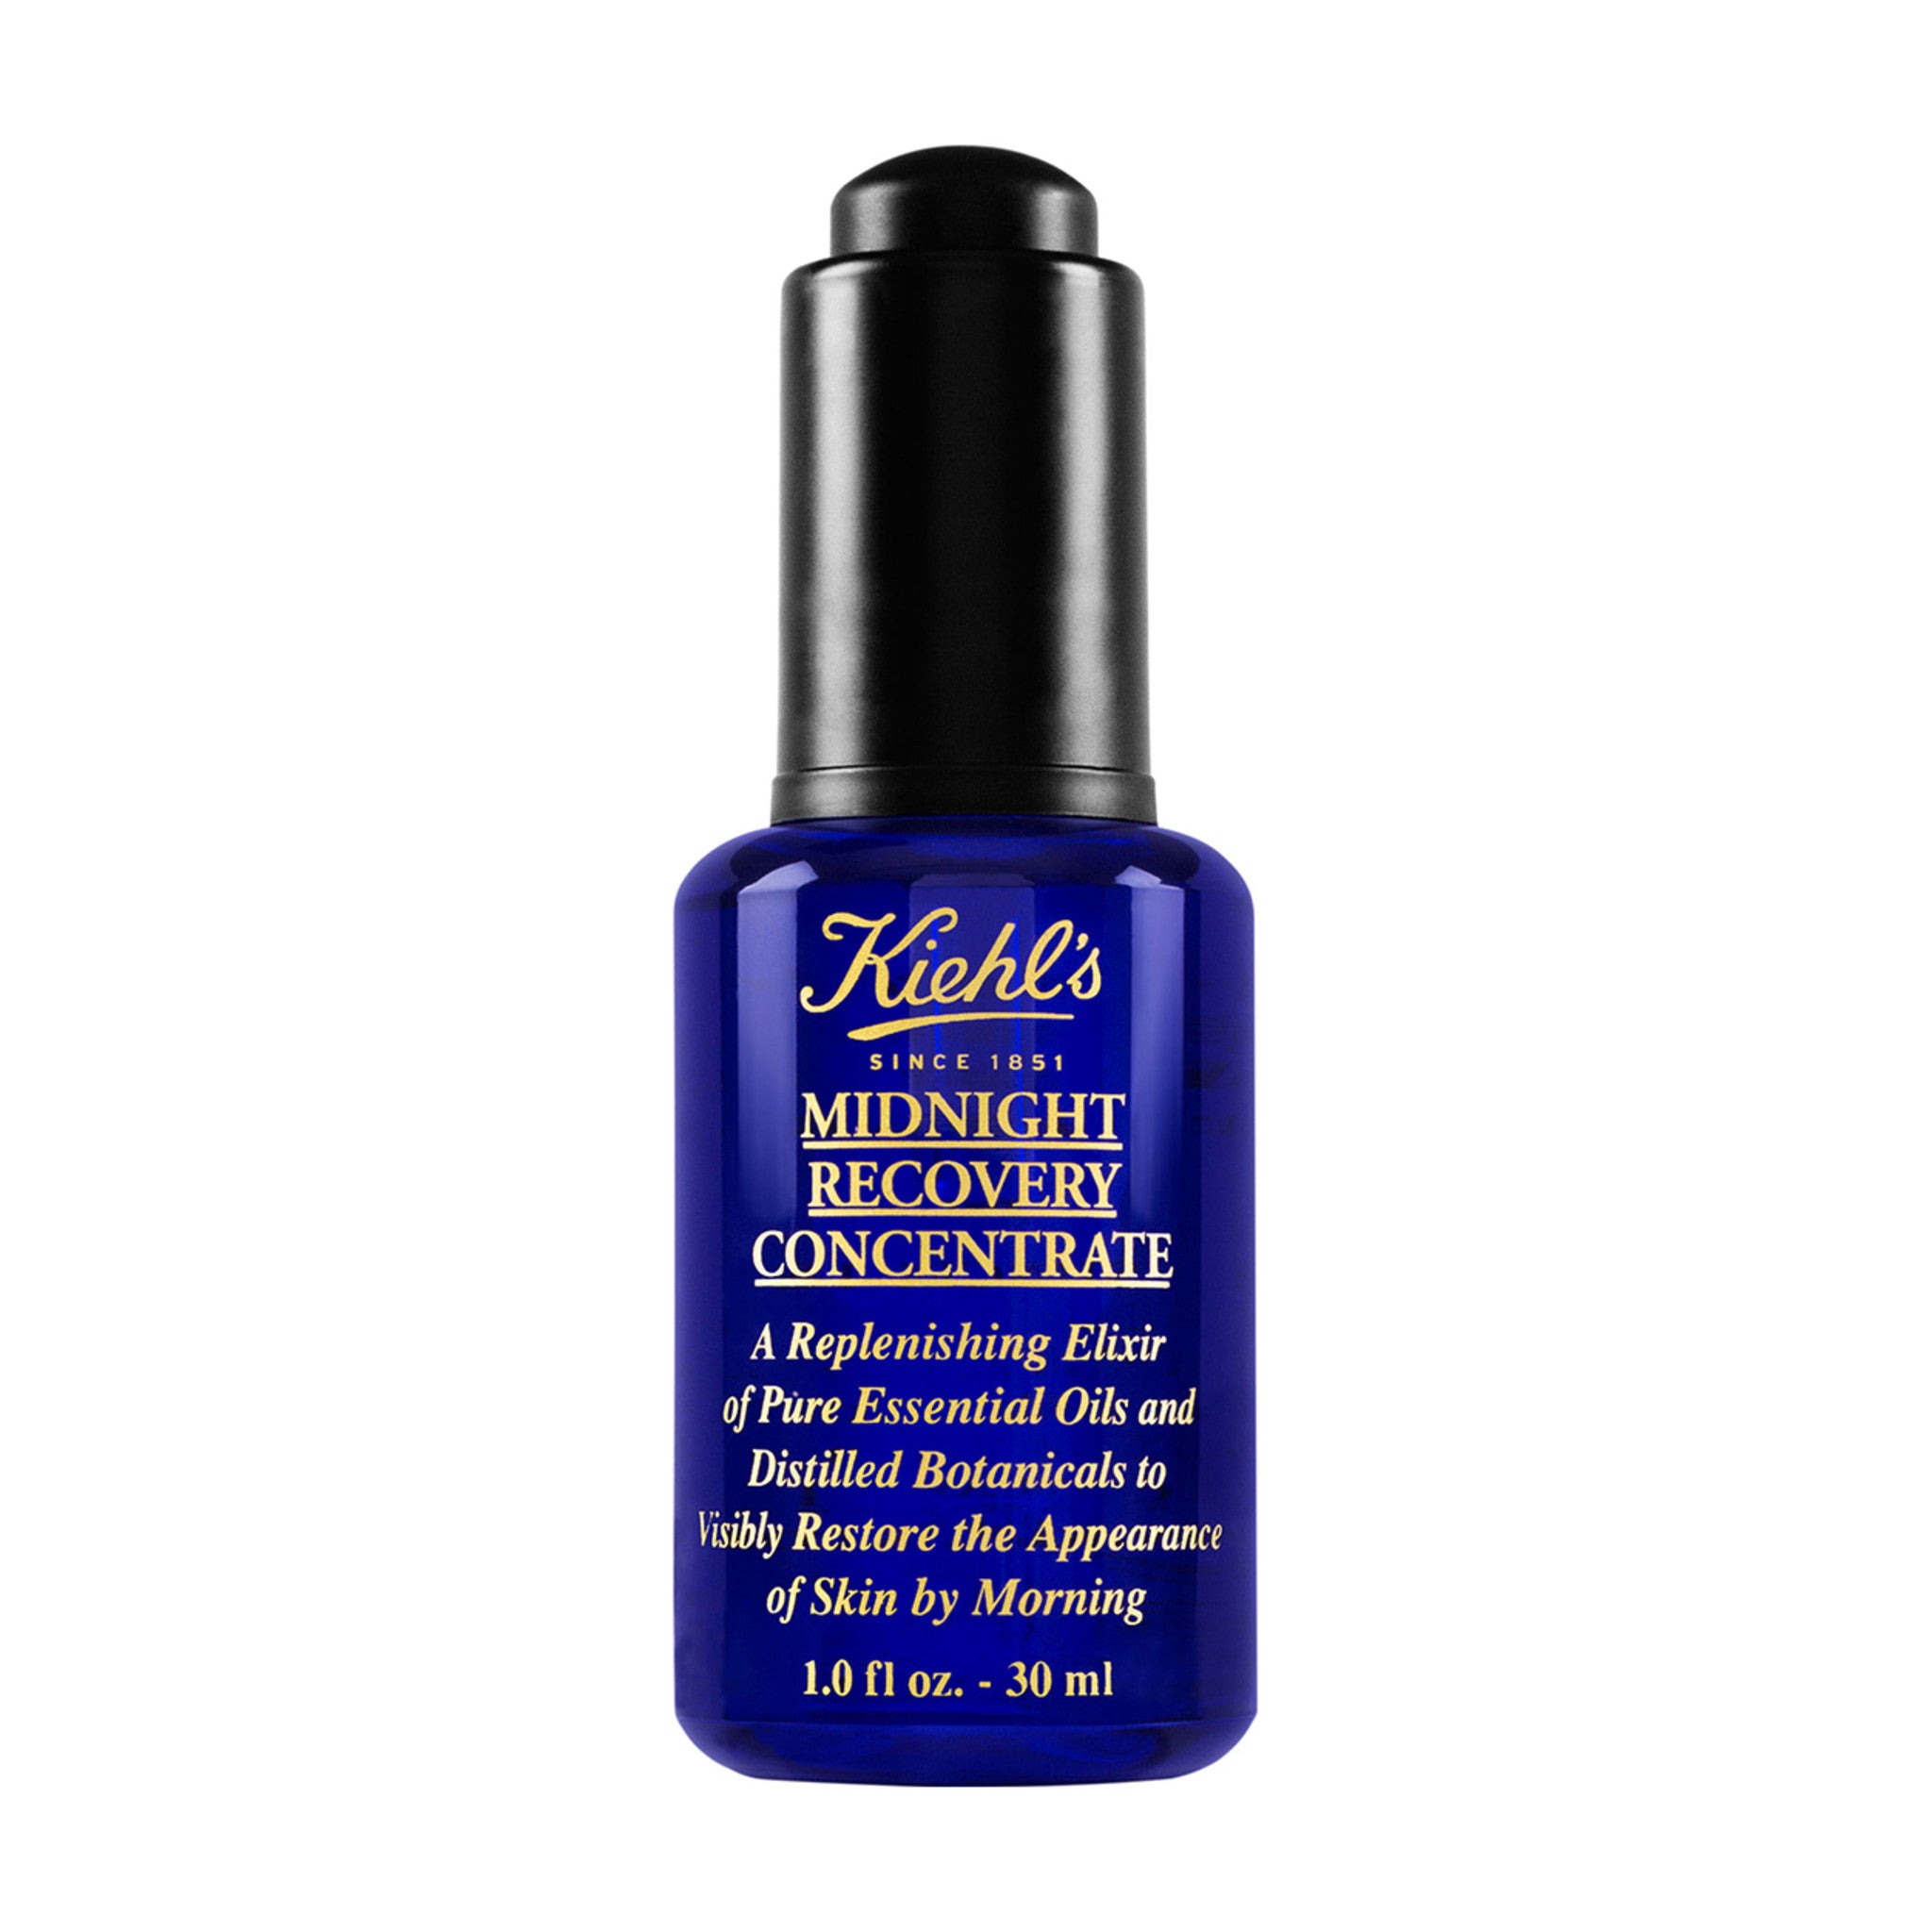 Kiehl's Since 1851 Midnight Recovery Concentrate Size variant: 1 fl oz | 30 ml main image.